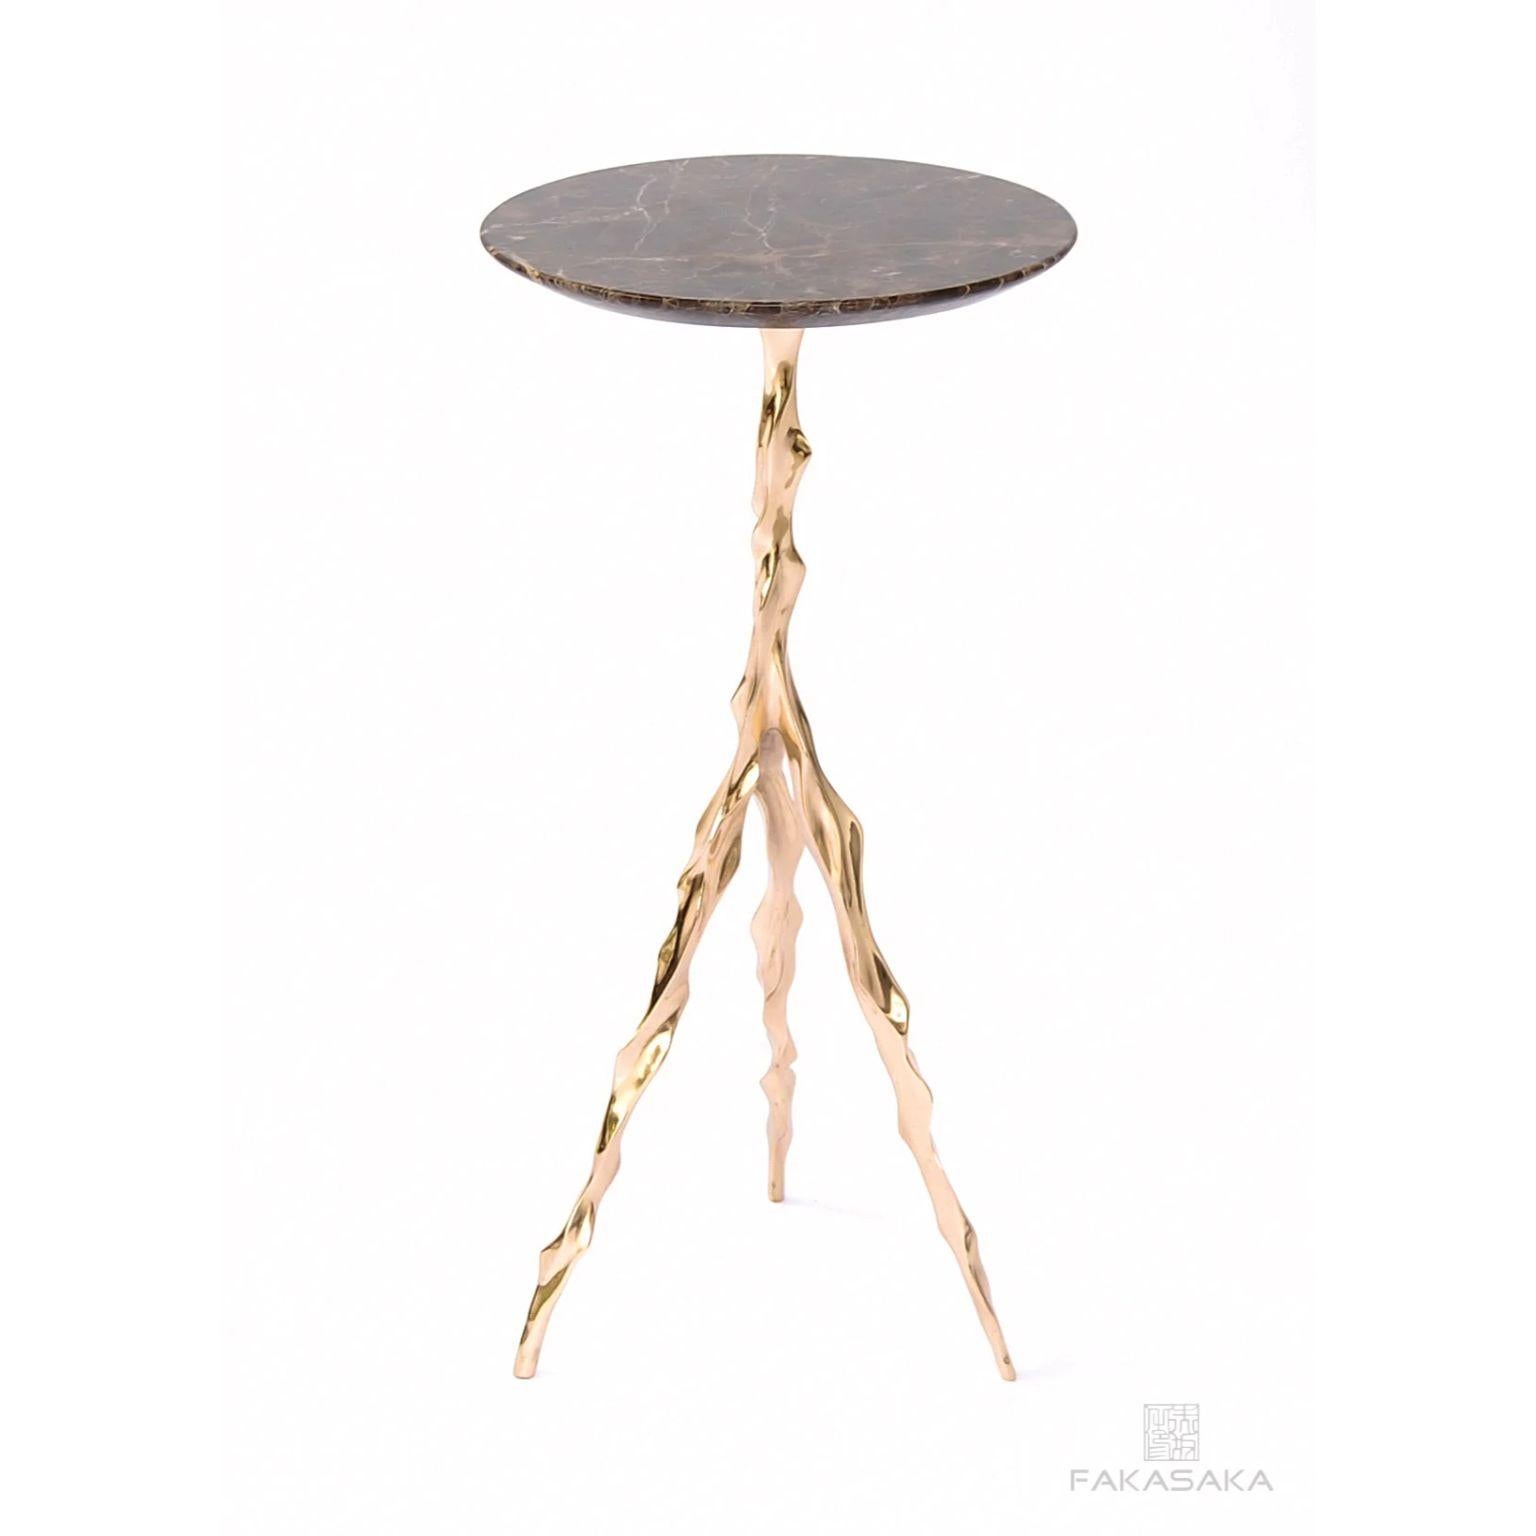 Etta drink table with Marrom Imperial marble top by Fakasaka Design.
Dimensions: W 27 cm, D 27 cm, H 62 cm.
Materials: polished bronze base, Marrom Imperial marble top.
 
Also available in different table top materials:
Nero Marquina Marble